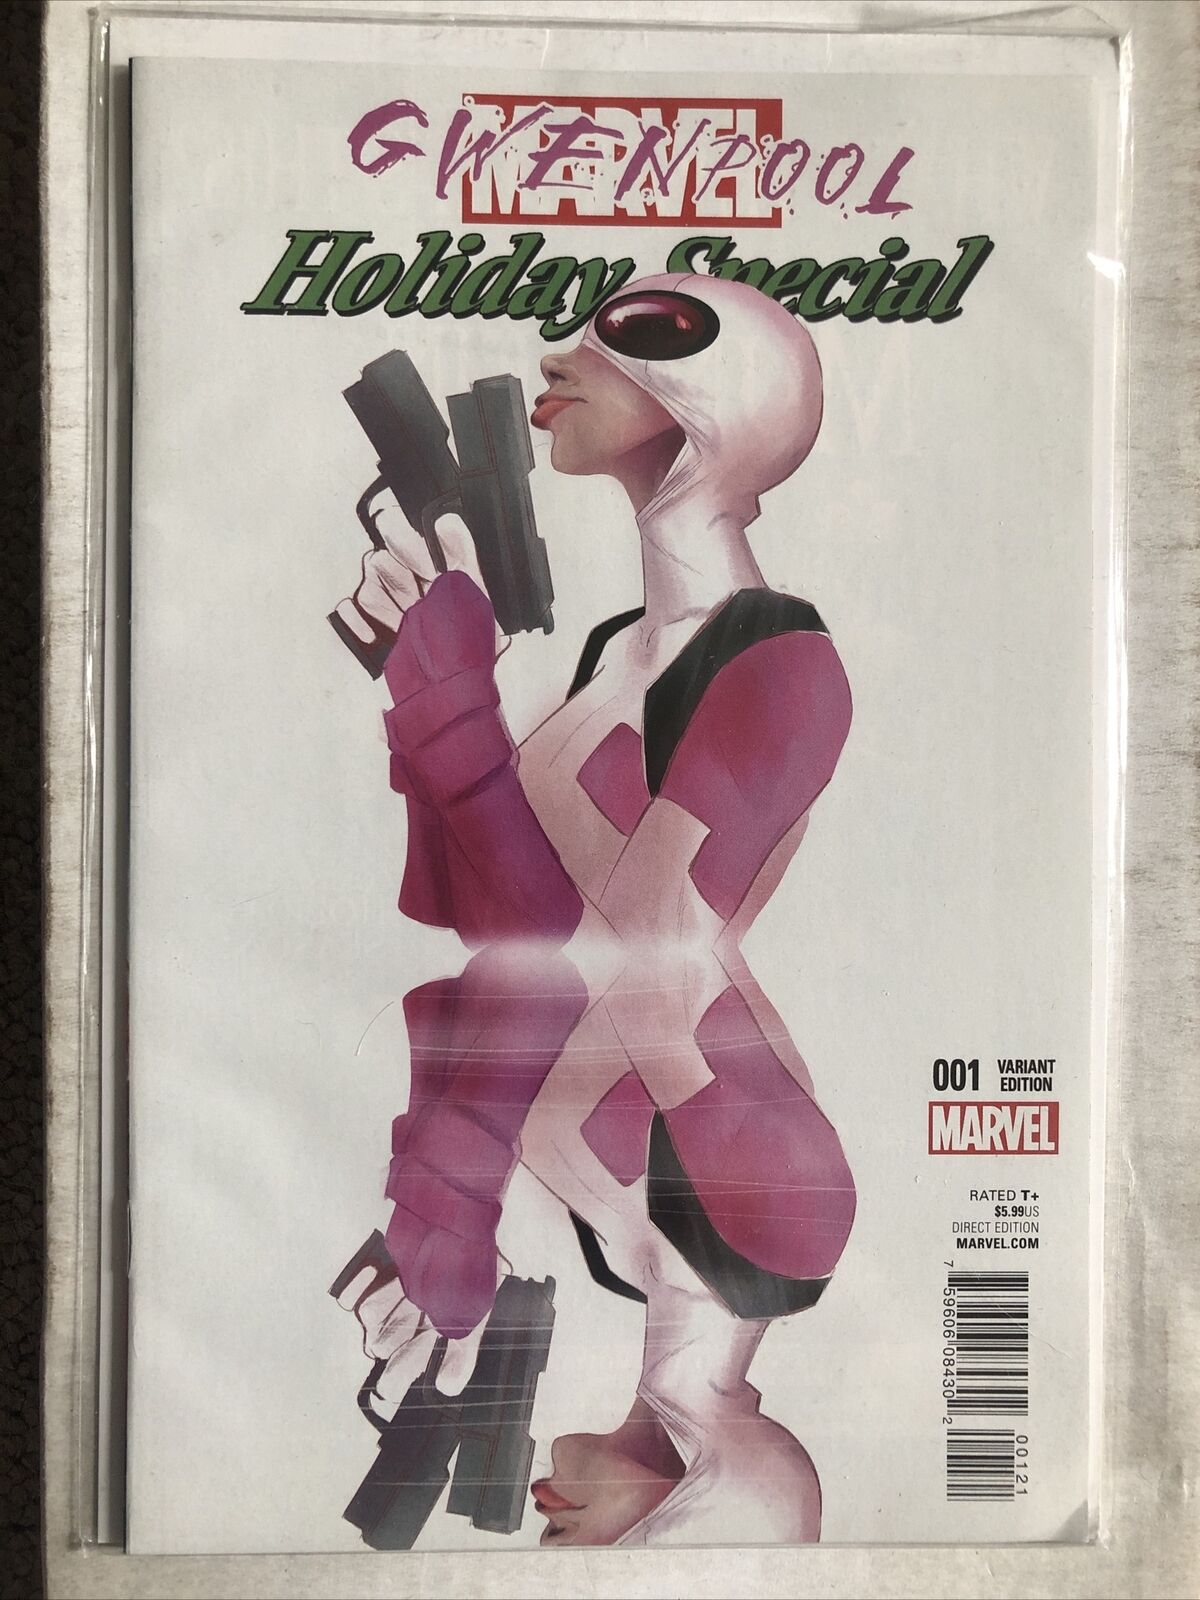 GWENPOOL HOLIDAY SPECIAL #1 (2015) ROBBI RODRIQUEZ VARIANT